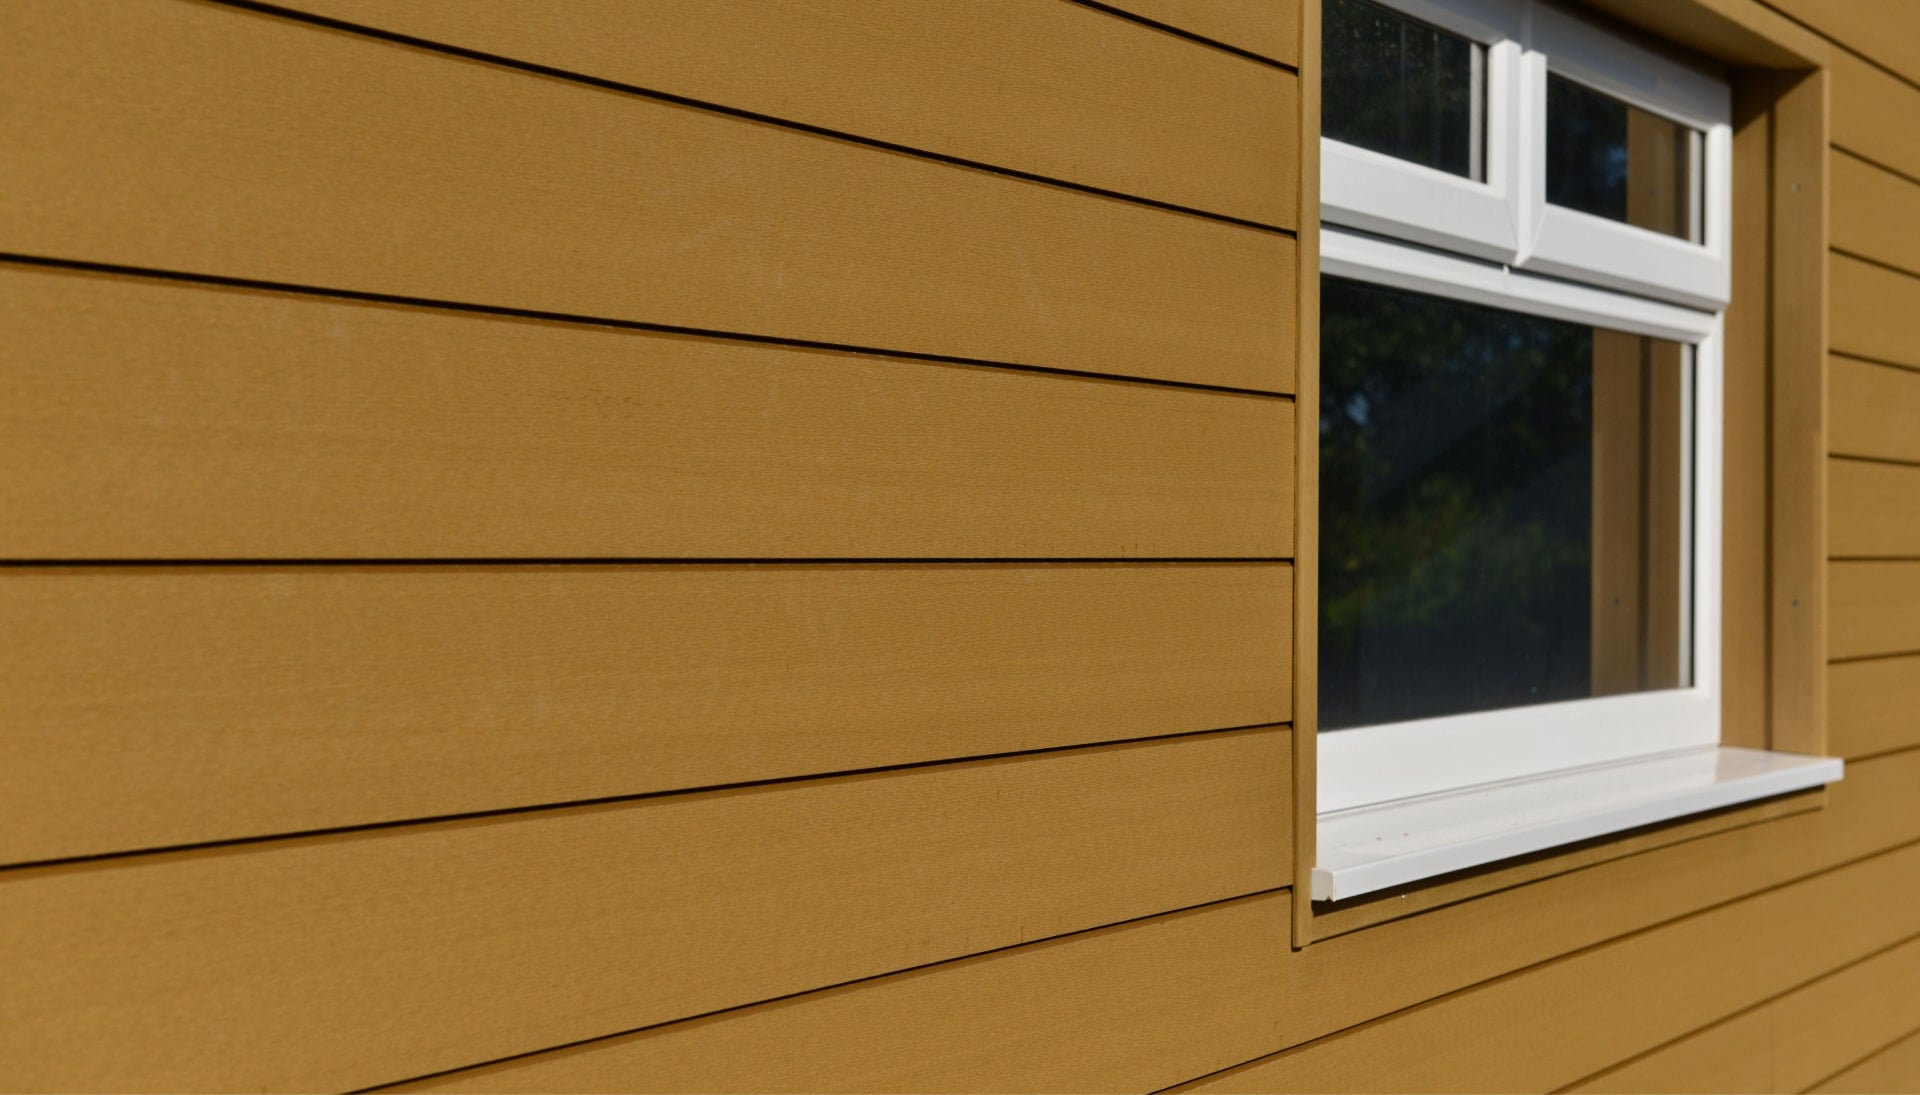 A residential property in Columbus, Ohio has new advanced composite siding